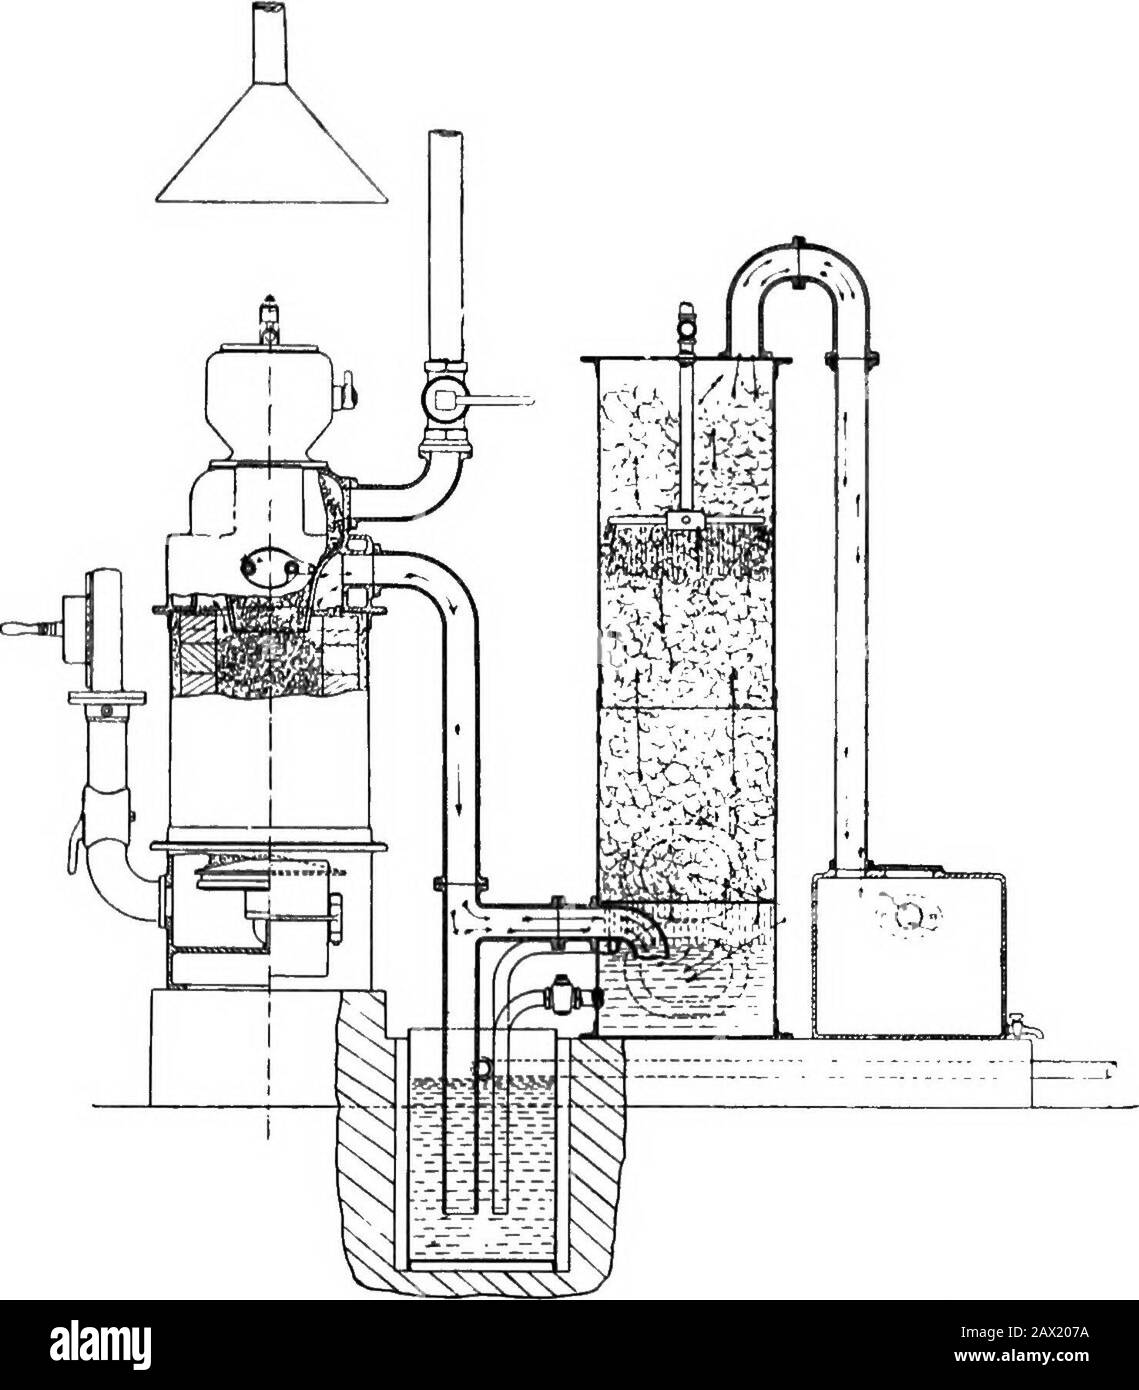 Suction gas plants . h as to make it entirely automatic in its action. Dryer or Expansion Box.—The dryer is constructed of mildsteel plates, riveted together, and containing two perforated ironplates carried on a central rod. Between these plates is packedwood fibre, thus ensuring absolutely dry and clean gas. Tools.—Two clinkering bars are provided, one straight and onebent, to enable the whole of the inside of the producer to besearched. Sundries.—Six feet of straight chimney pipe is provided, alsococks for regulating the water supply. Full erecting and running instructions are provided. Whe Stock Photo